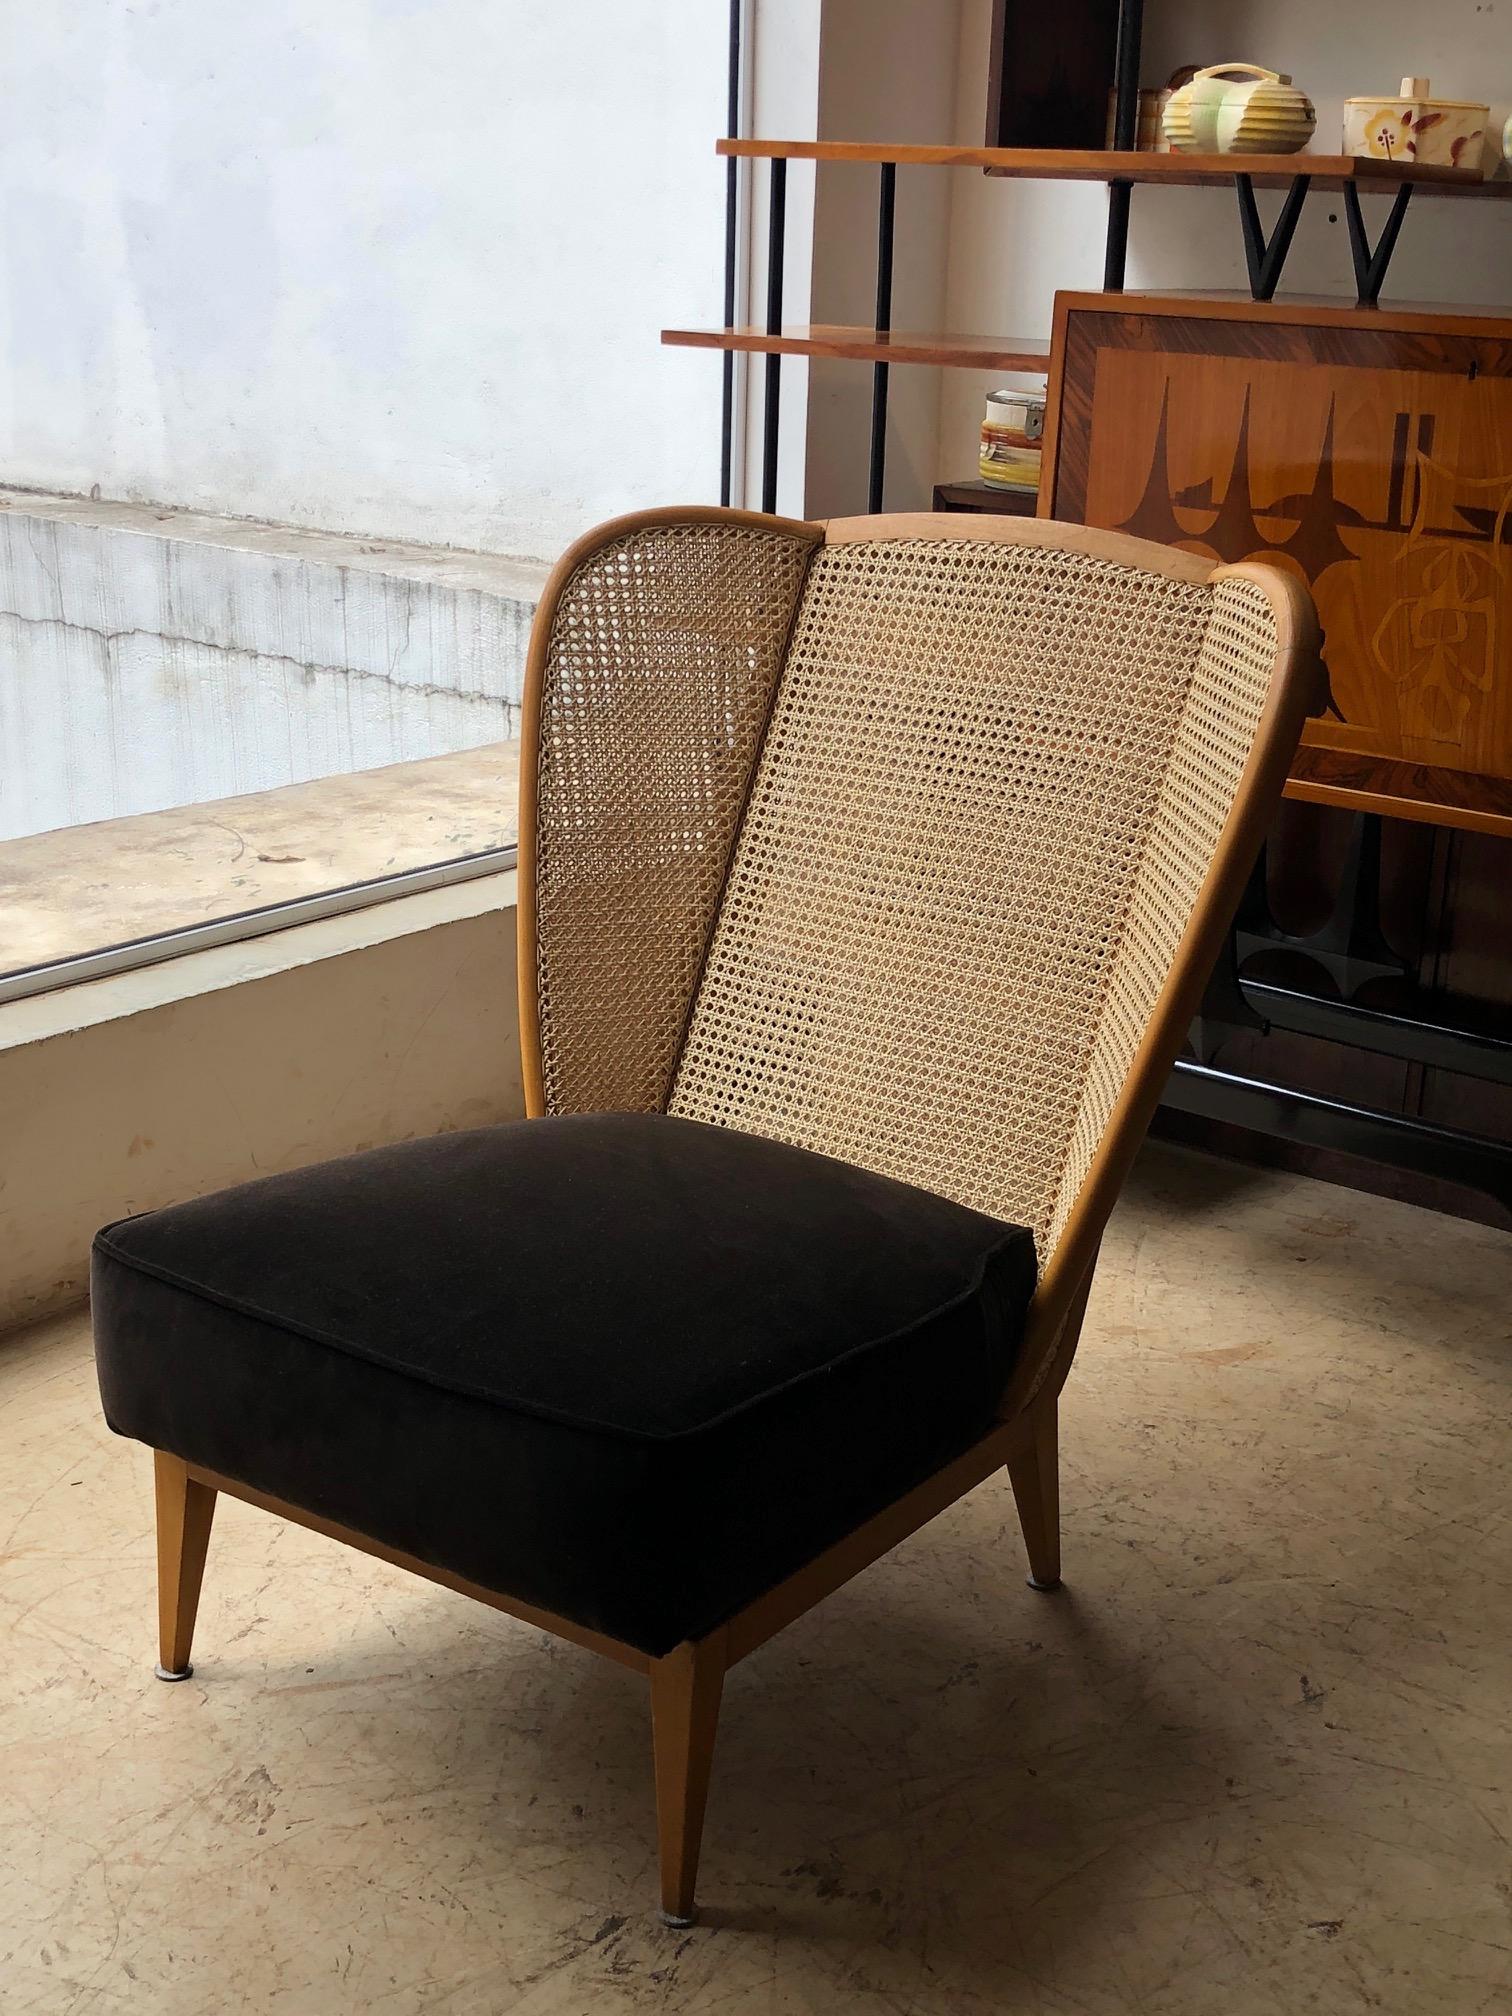 Brazilian Giuseppe Scapinelli 'Attributed', Pair of chairs with Straw Backrest